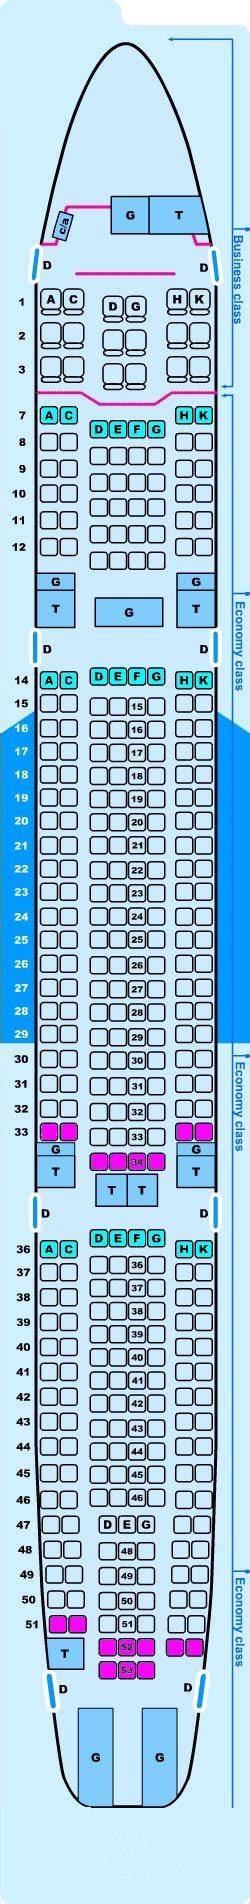 A330-300 airbus seating chart. For your next China Eastern flight, use this seating chart to get the most comfortable seats, legroom, and recline on . Seat Maps; Airlines; Cheap Flights; Comparison Charts. Short-haul Economy Class ... Airbus A330-200 (33H) Layout 3; Airbus A330-300 (333) Boeing 737-700 (737) Boeing 737-800 (738) Layout 1; Boeing 737-800 (738) Layout 2 ... 